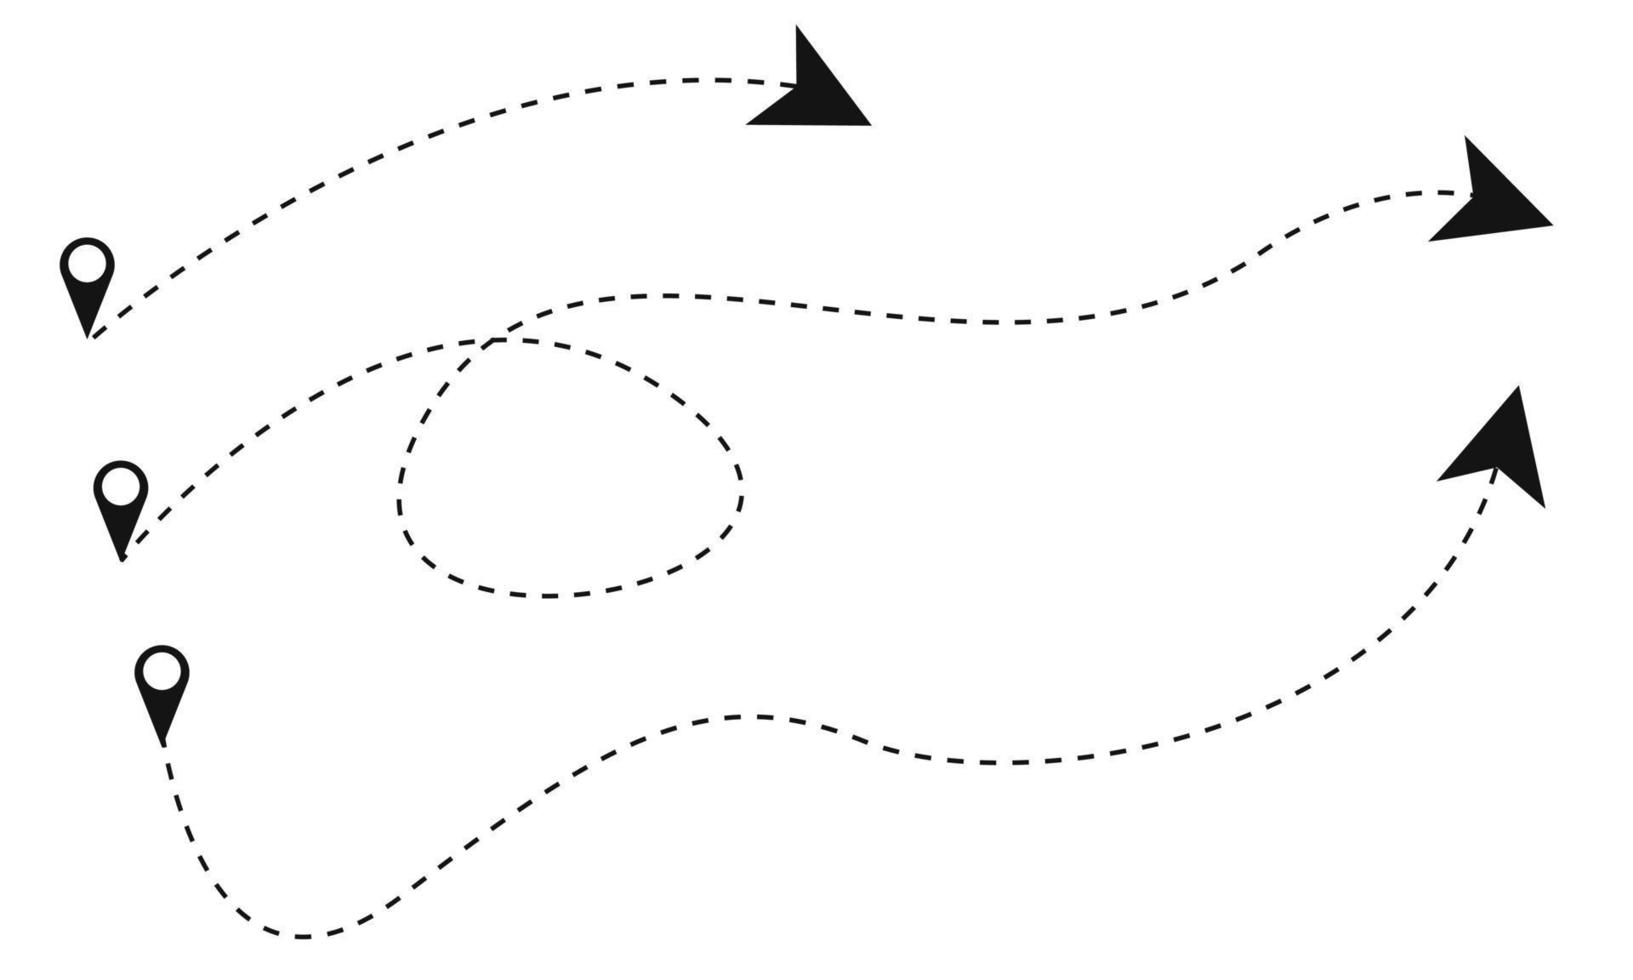 Paper plane path route with start point and dash line trace. vector illustration. easy editable stroke. EPS 10.